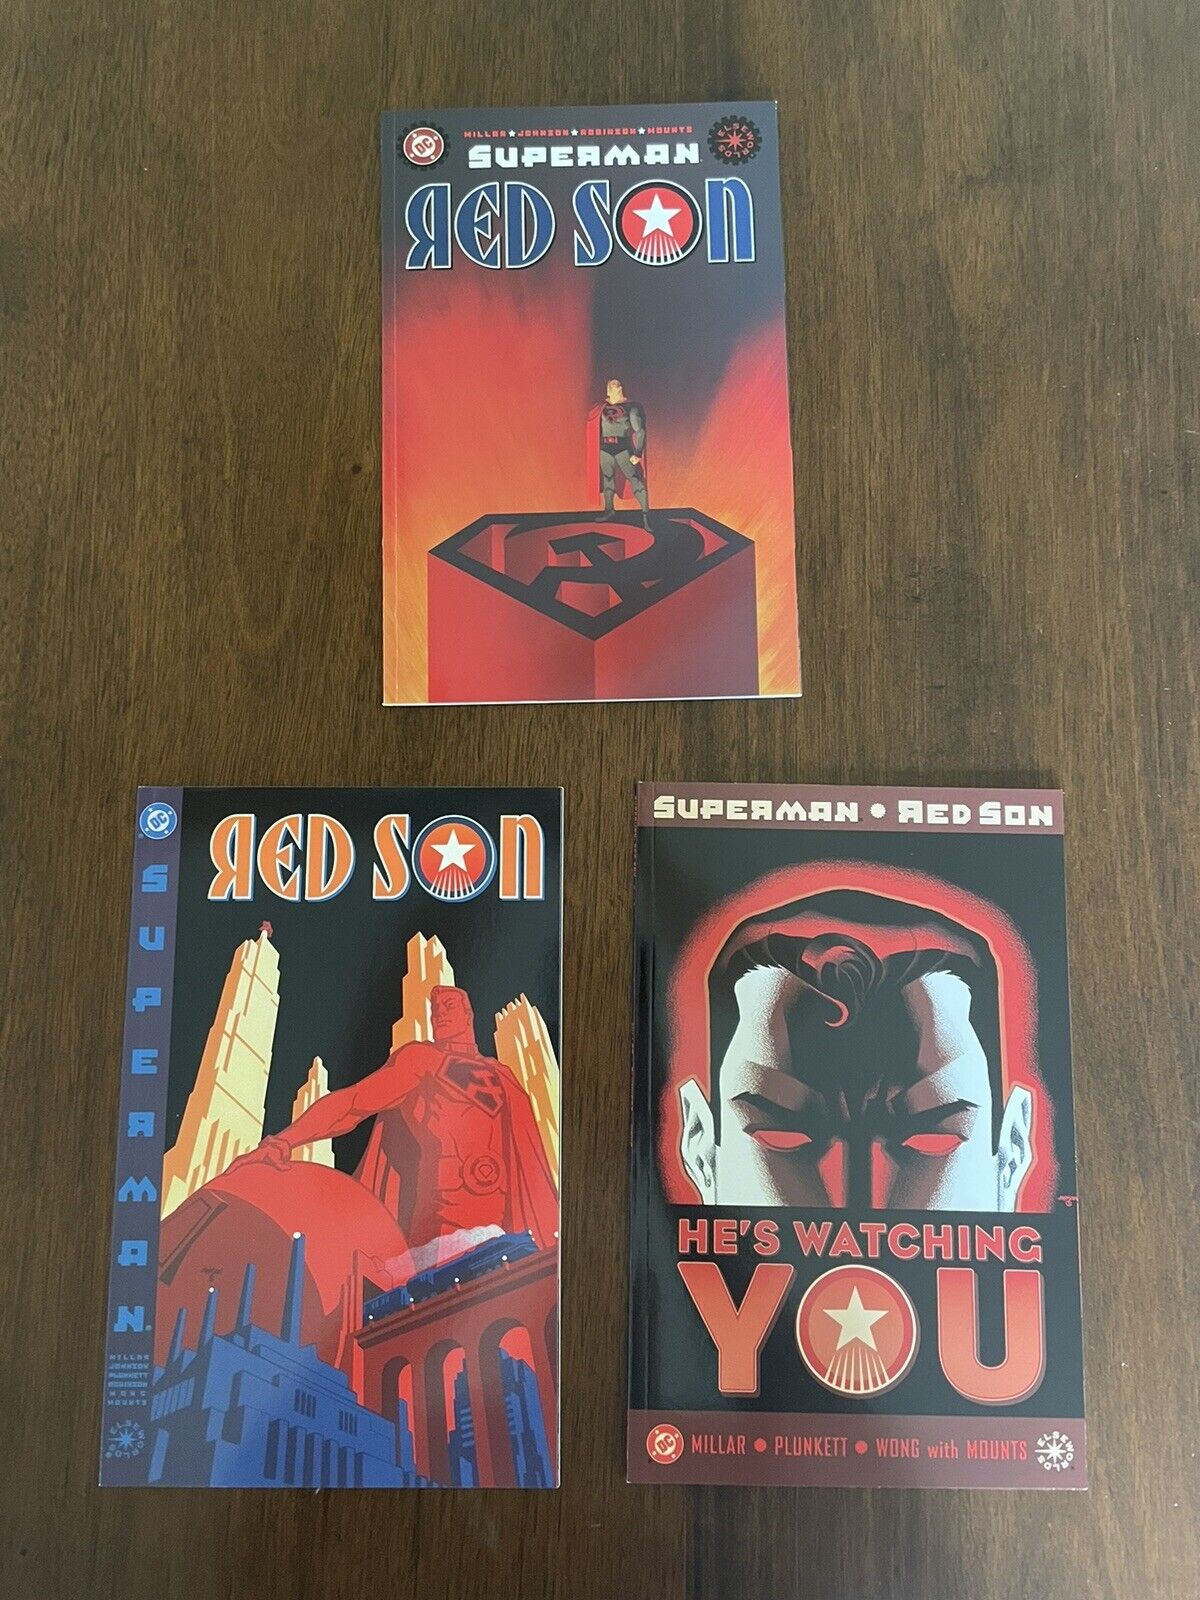 DC COMICS SUPERMAN RED SON 1 2 3 ELSEWORLDS COMPLETE SET 2003 FIRST PRINTING